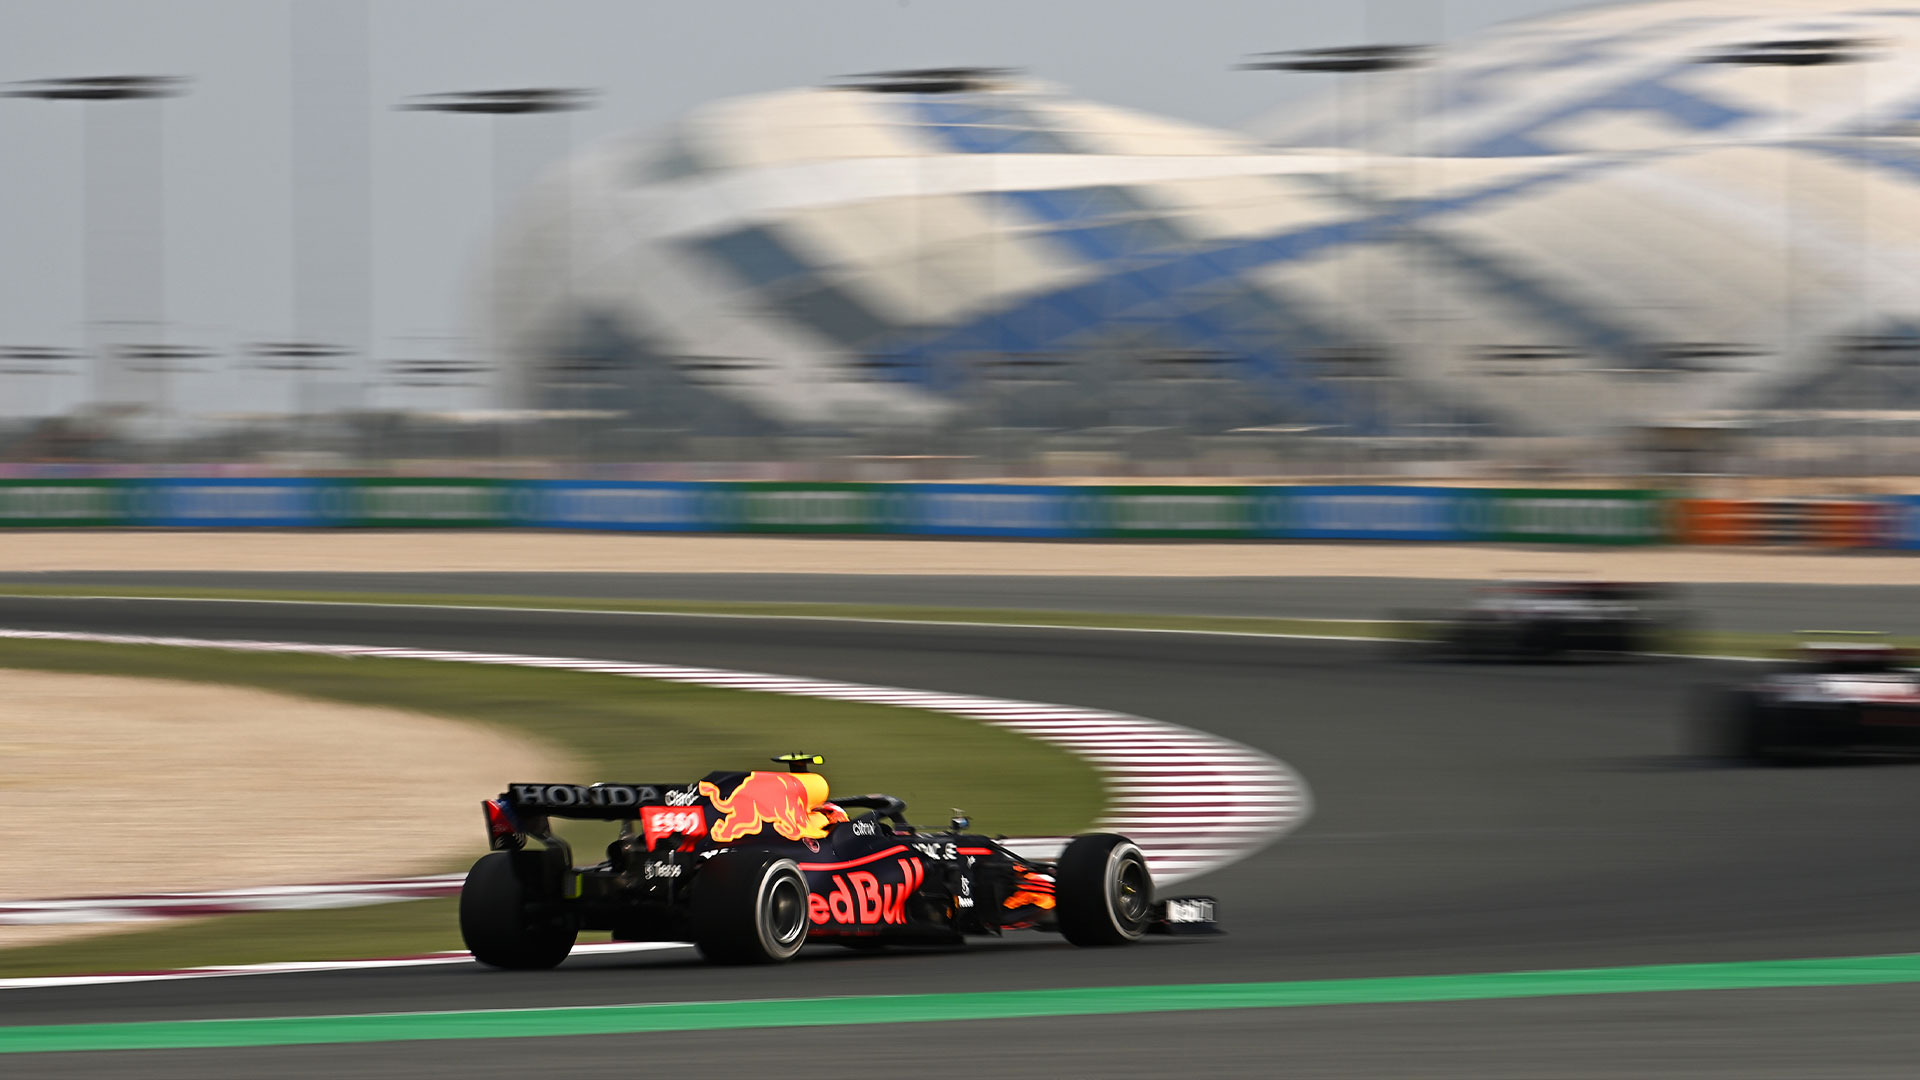 Qatar Grand Prix: Verstappen sets the pace in FP1 as Hamilton experiences power issues(Results)